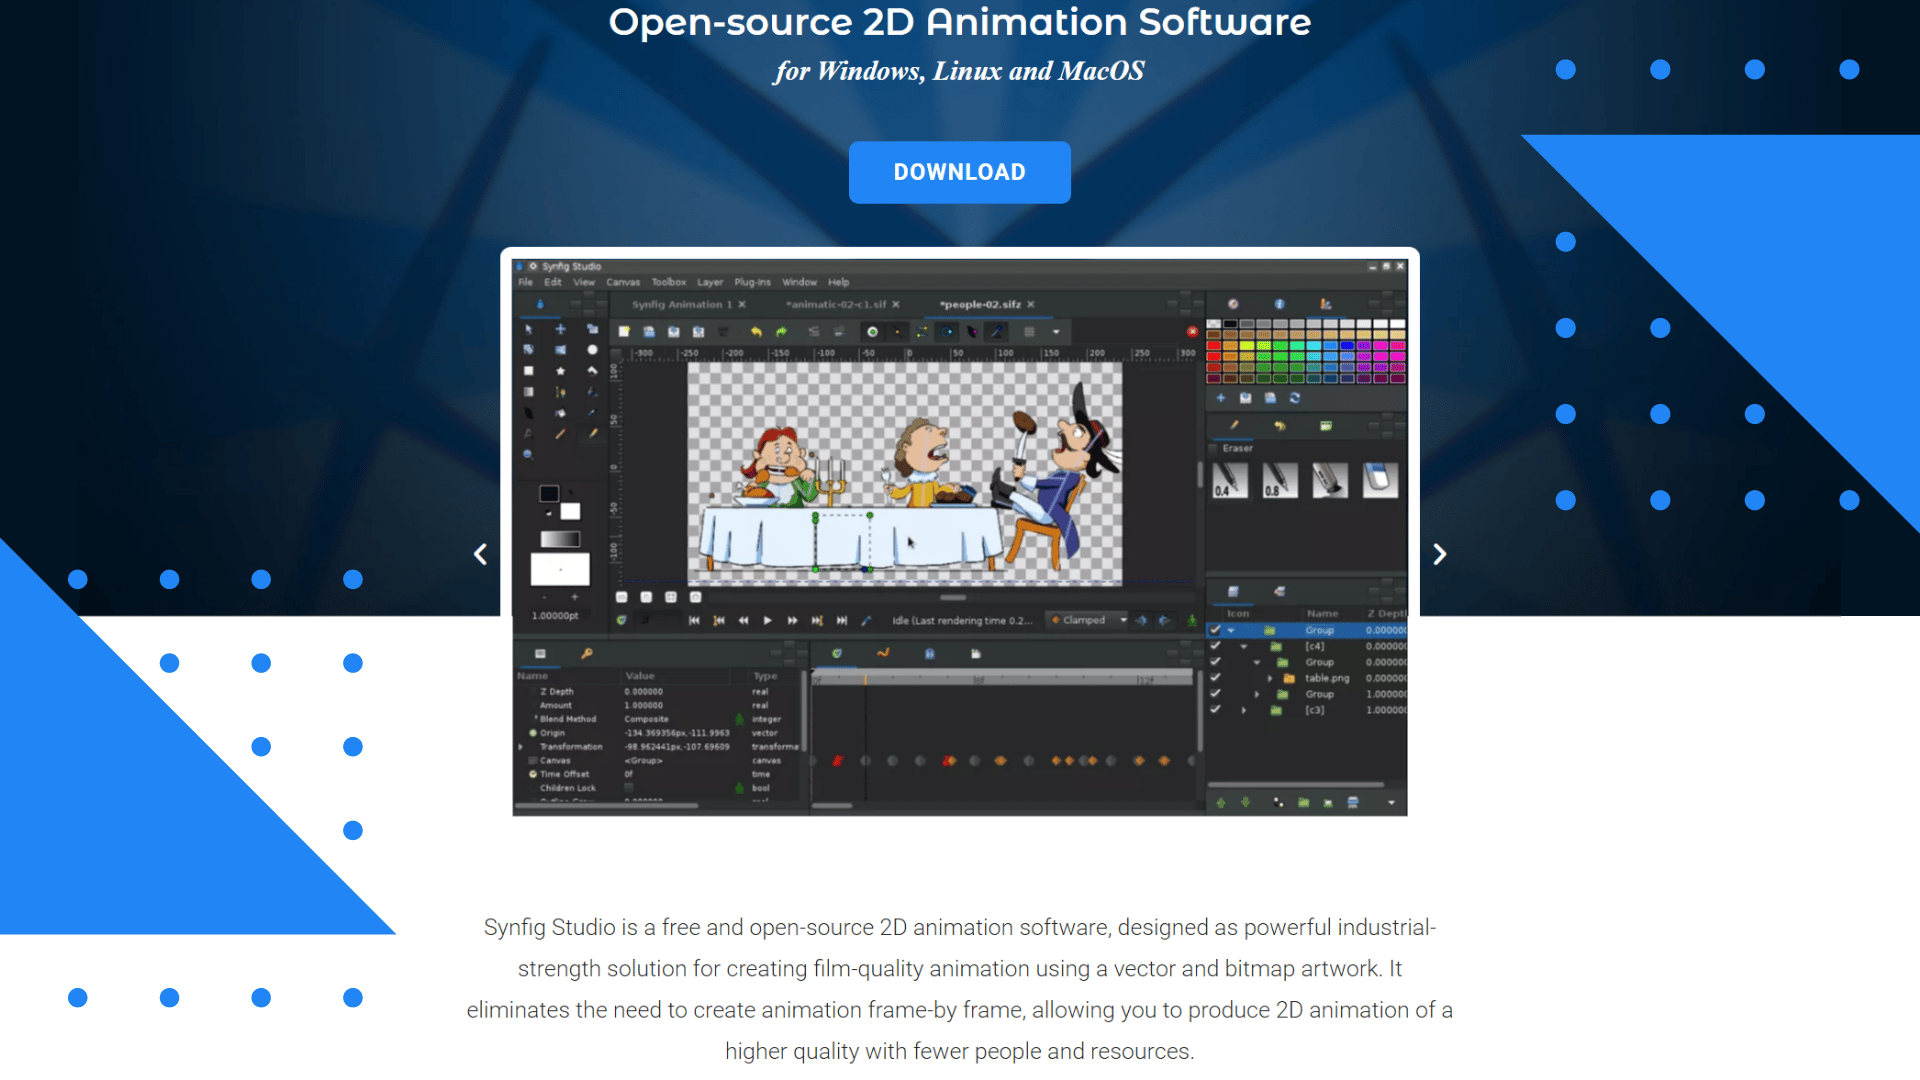 Synfig Studio Features